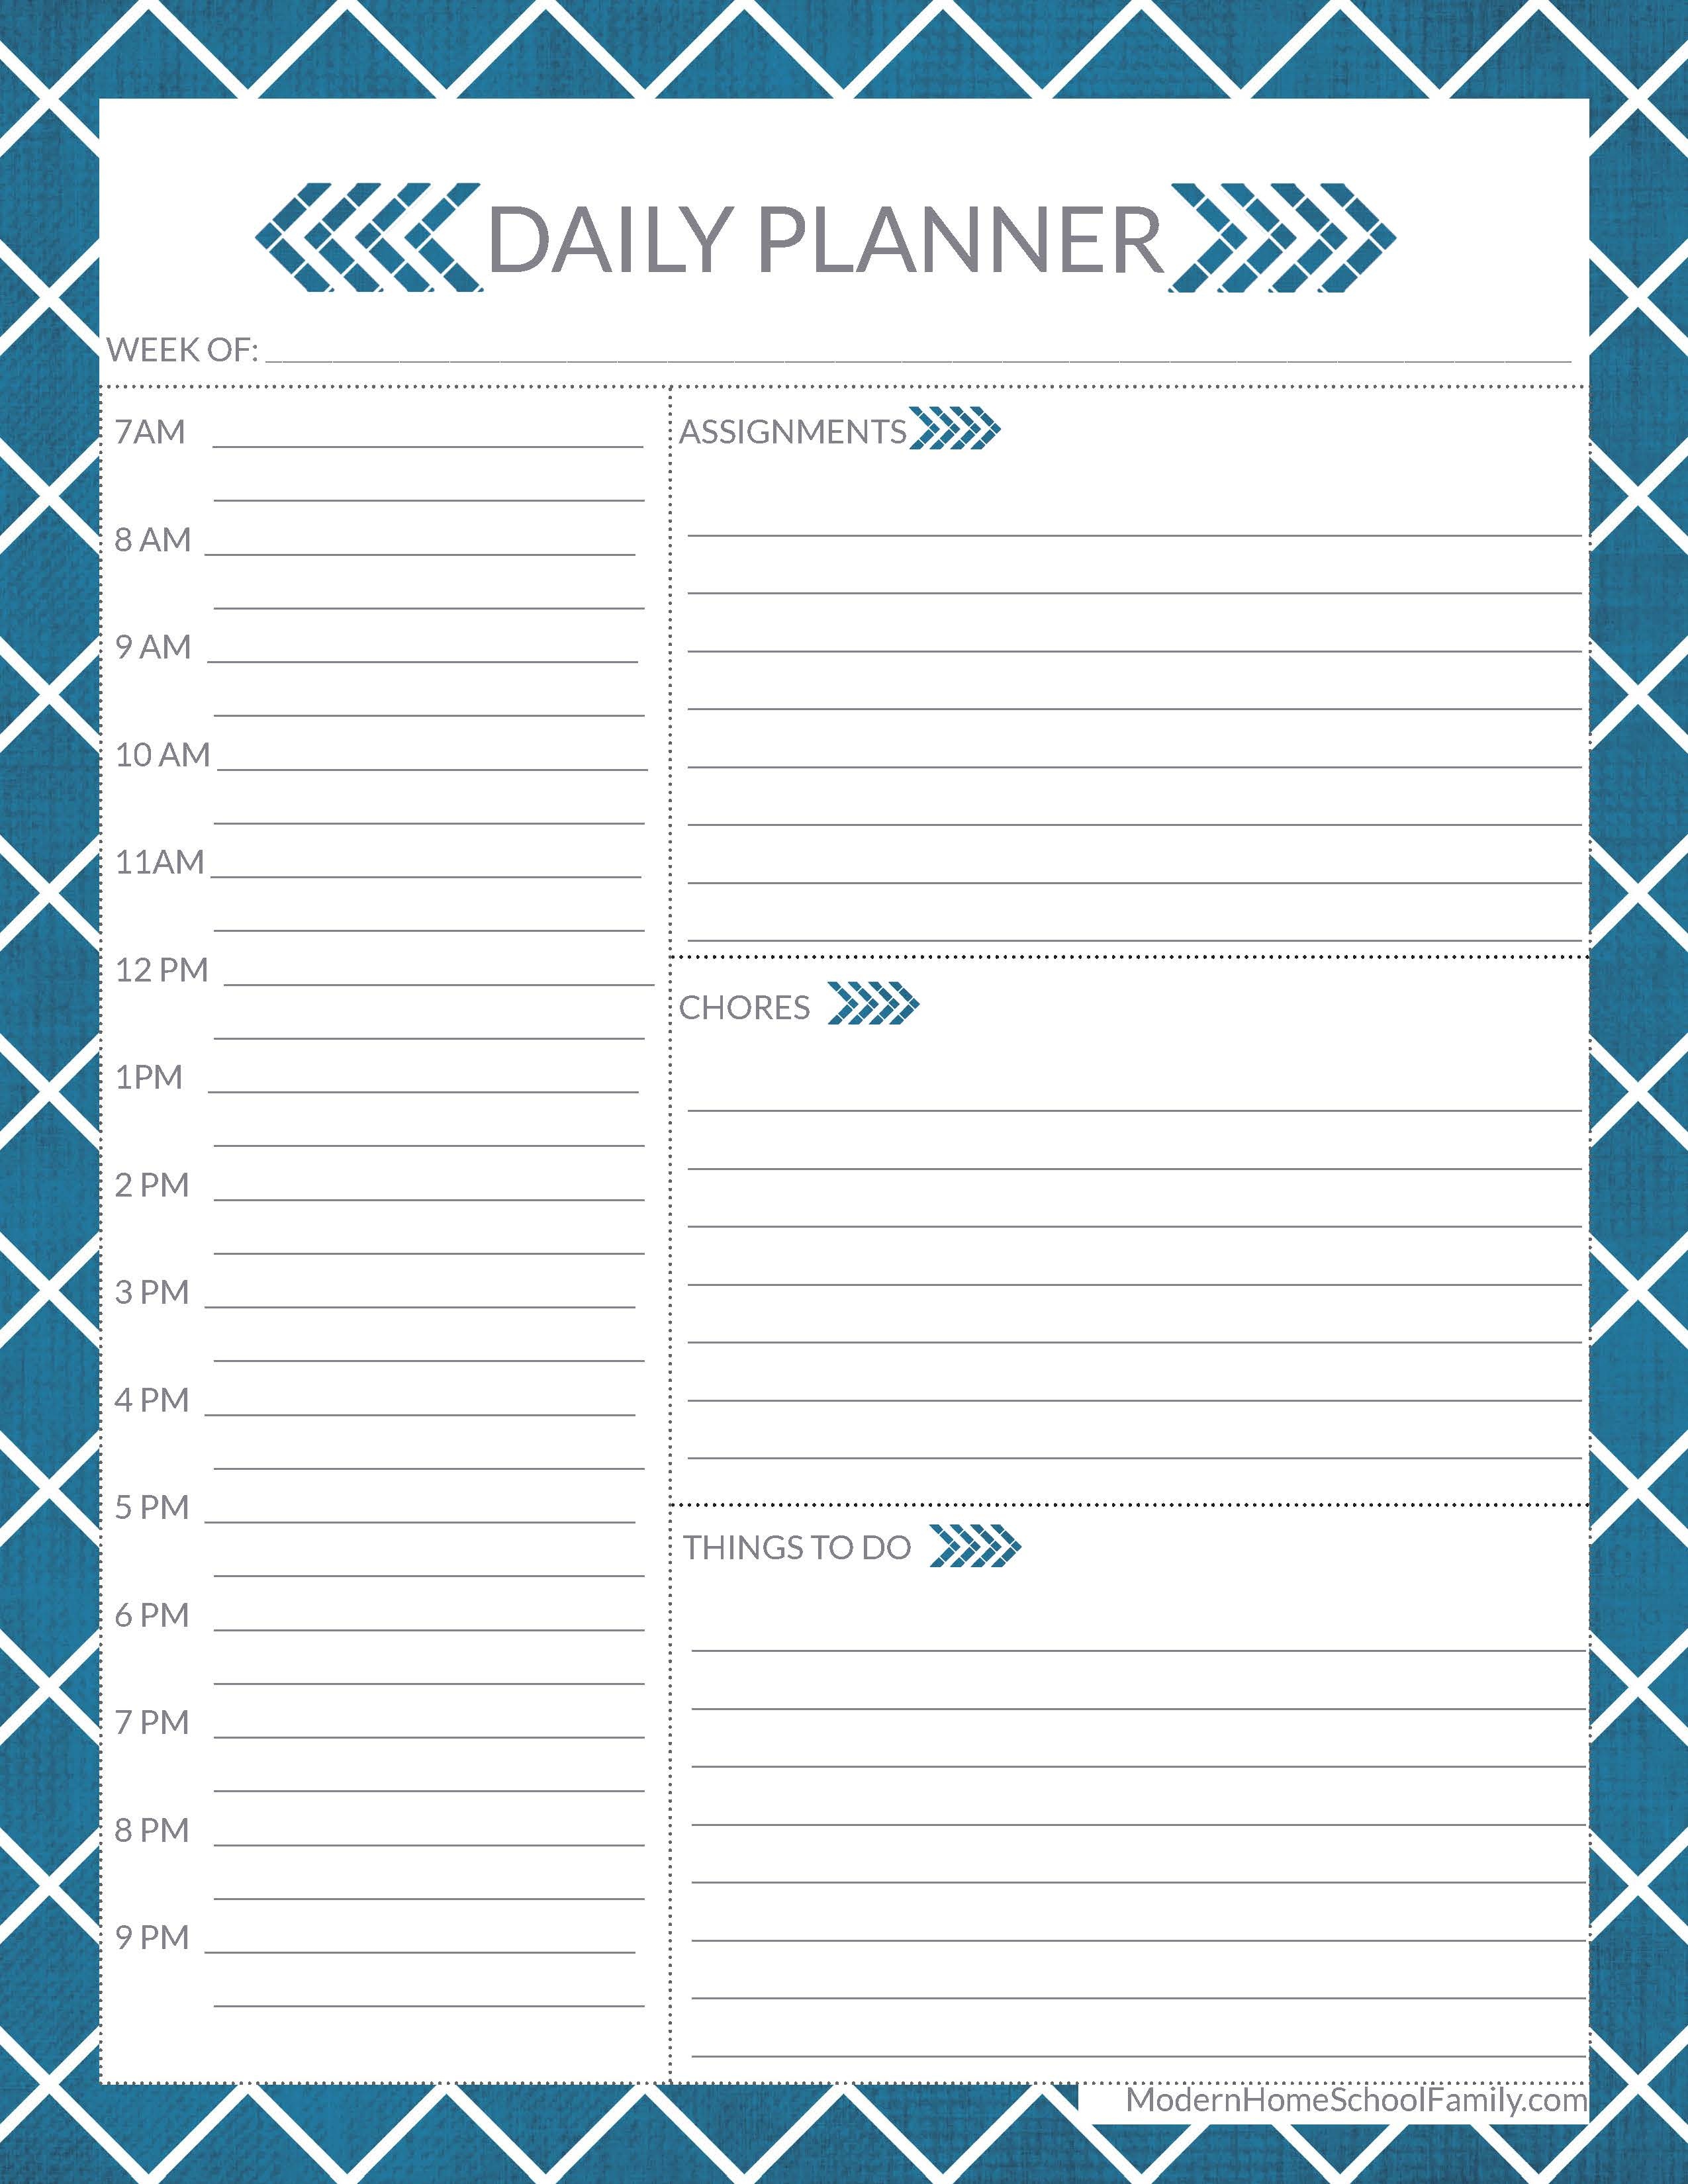 Free Homeschool Planner For High School Page - Modern Homeschool Family - Free Homeschool Printable Worksheets